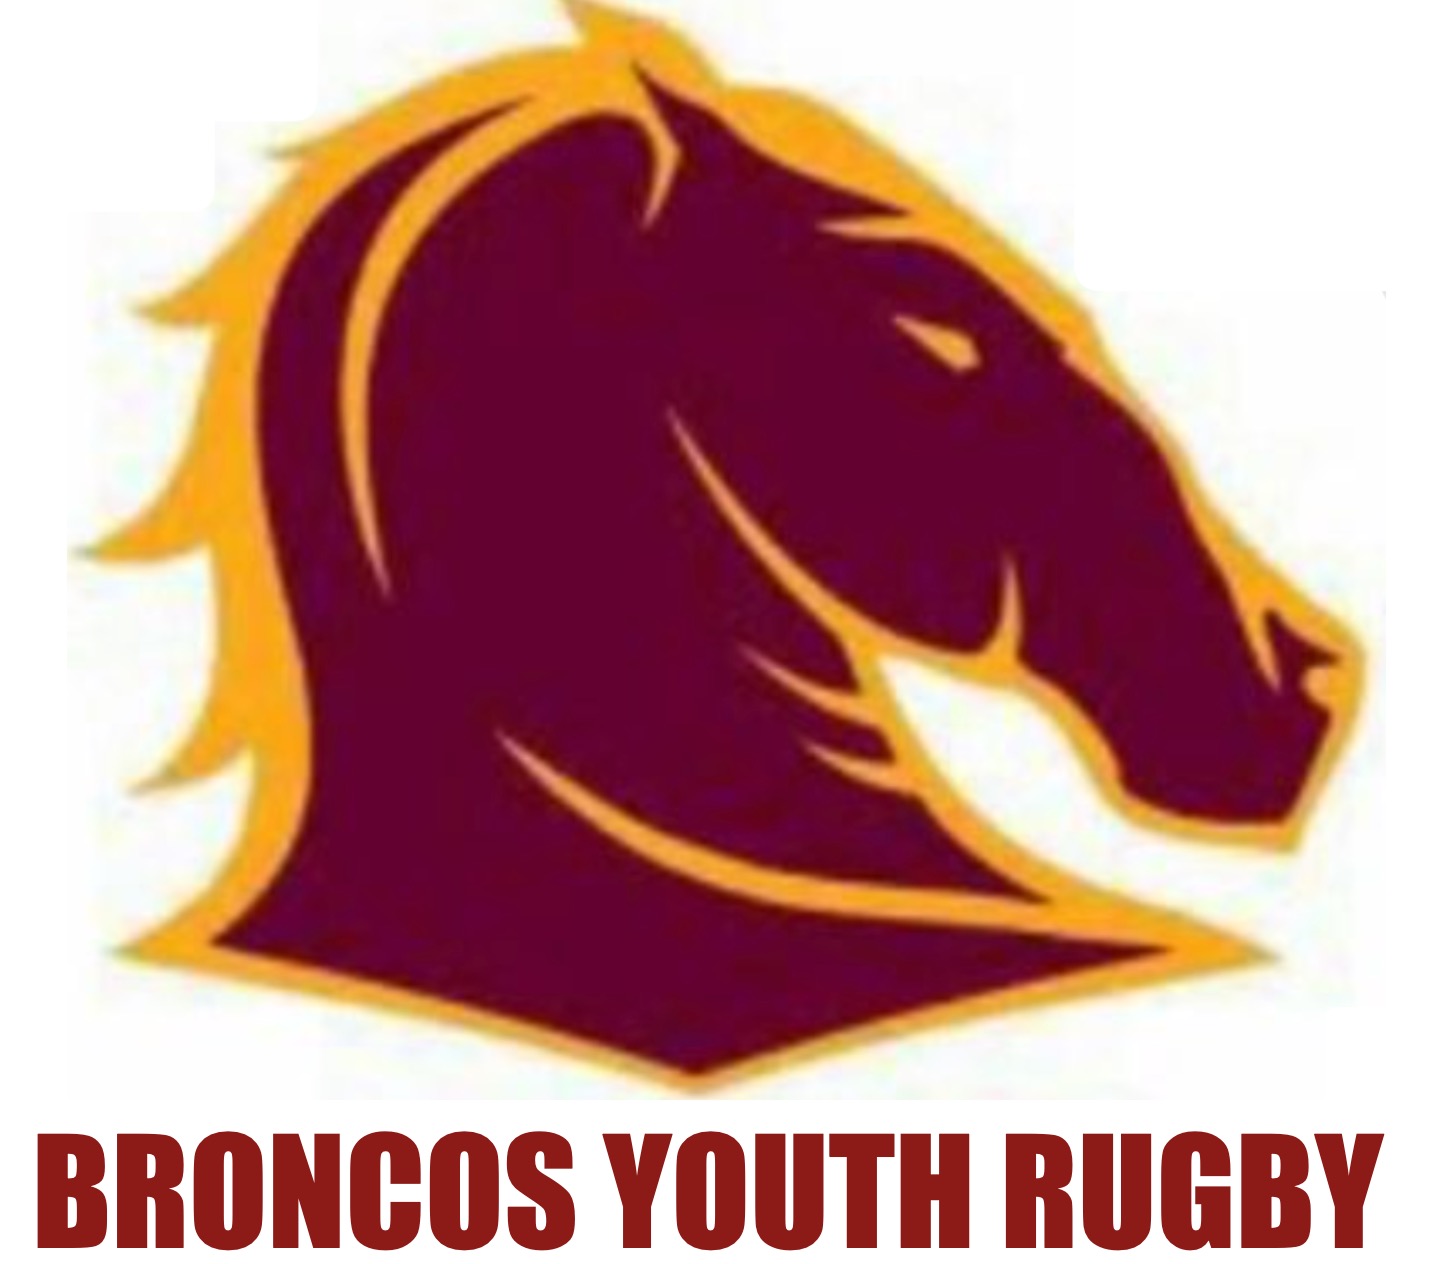 Broncos Youth Rugby